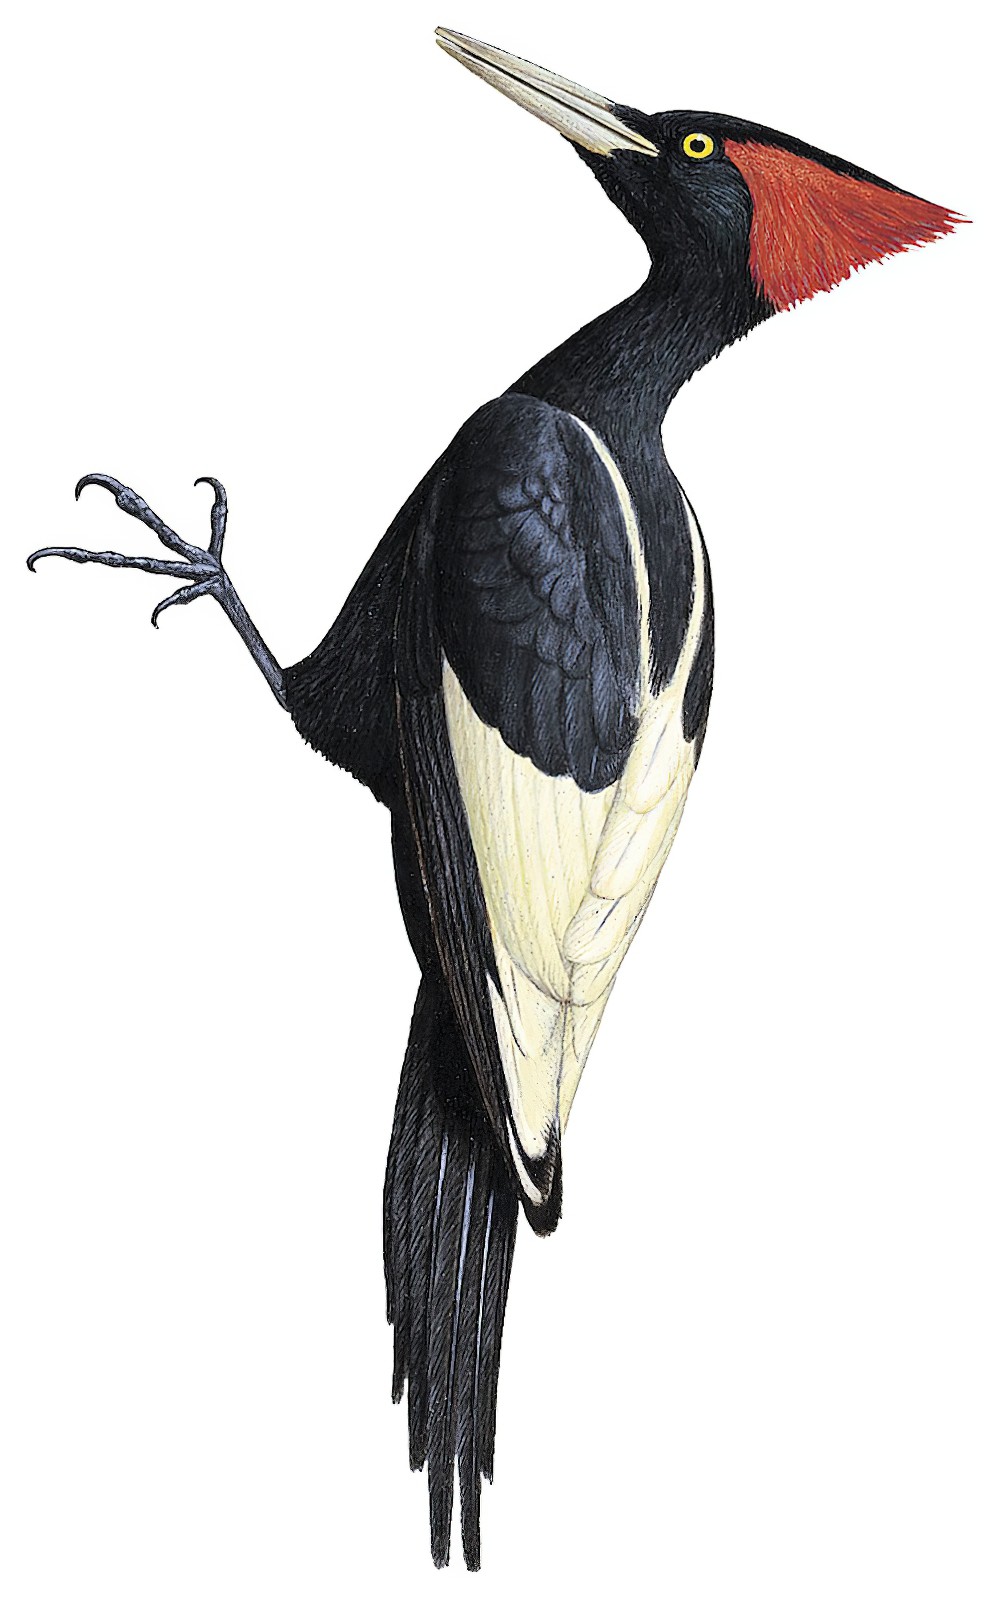 Imperial Woodpecker / Campephilus imperialis